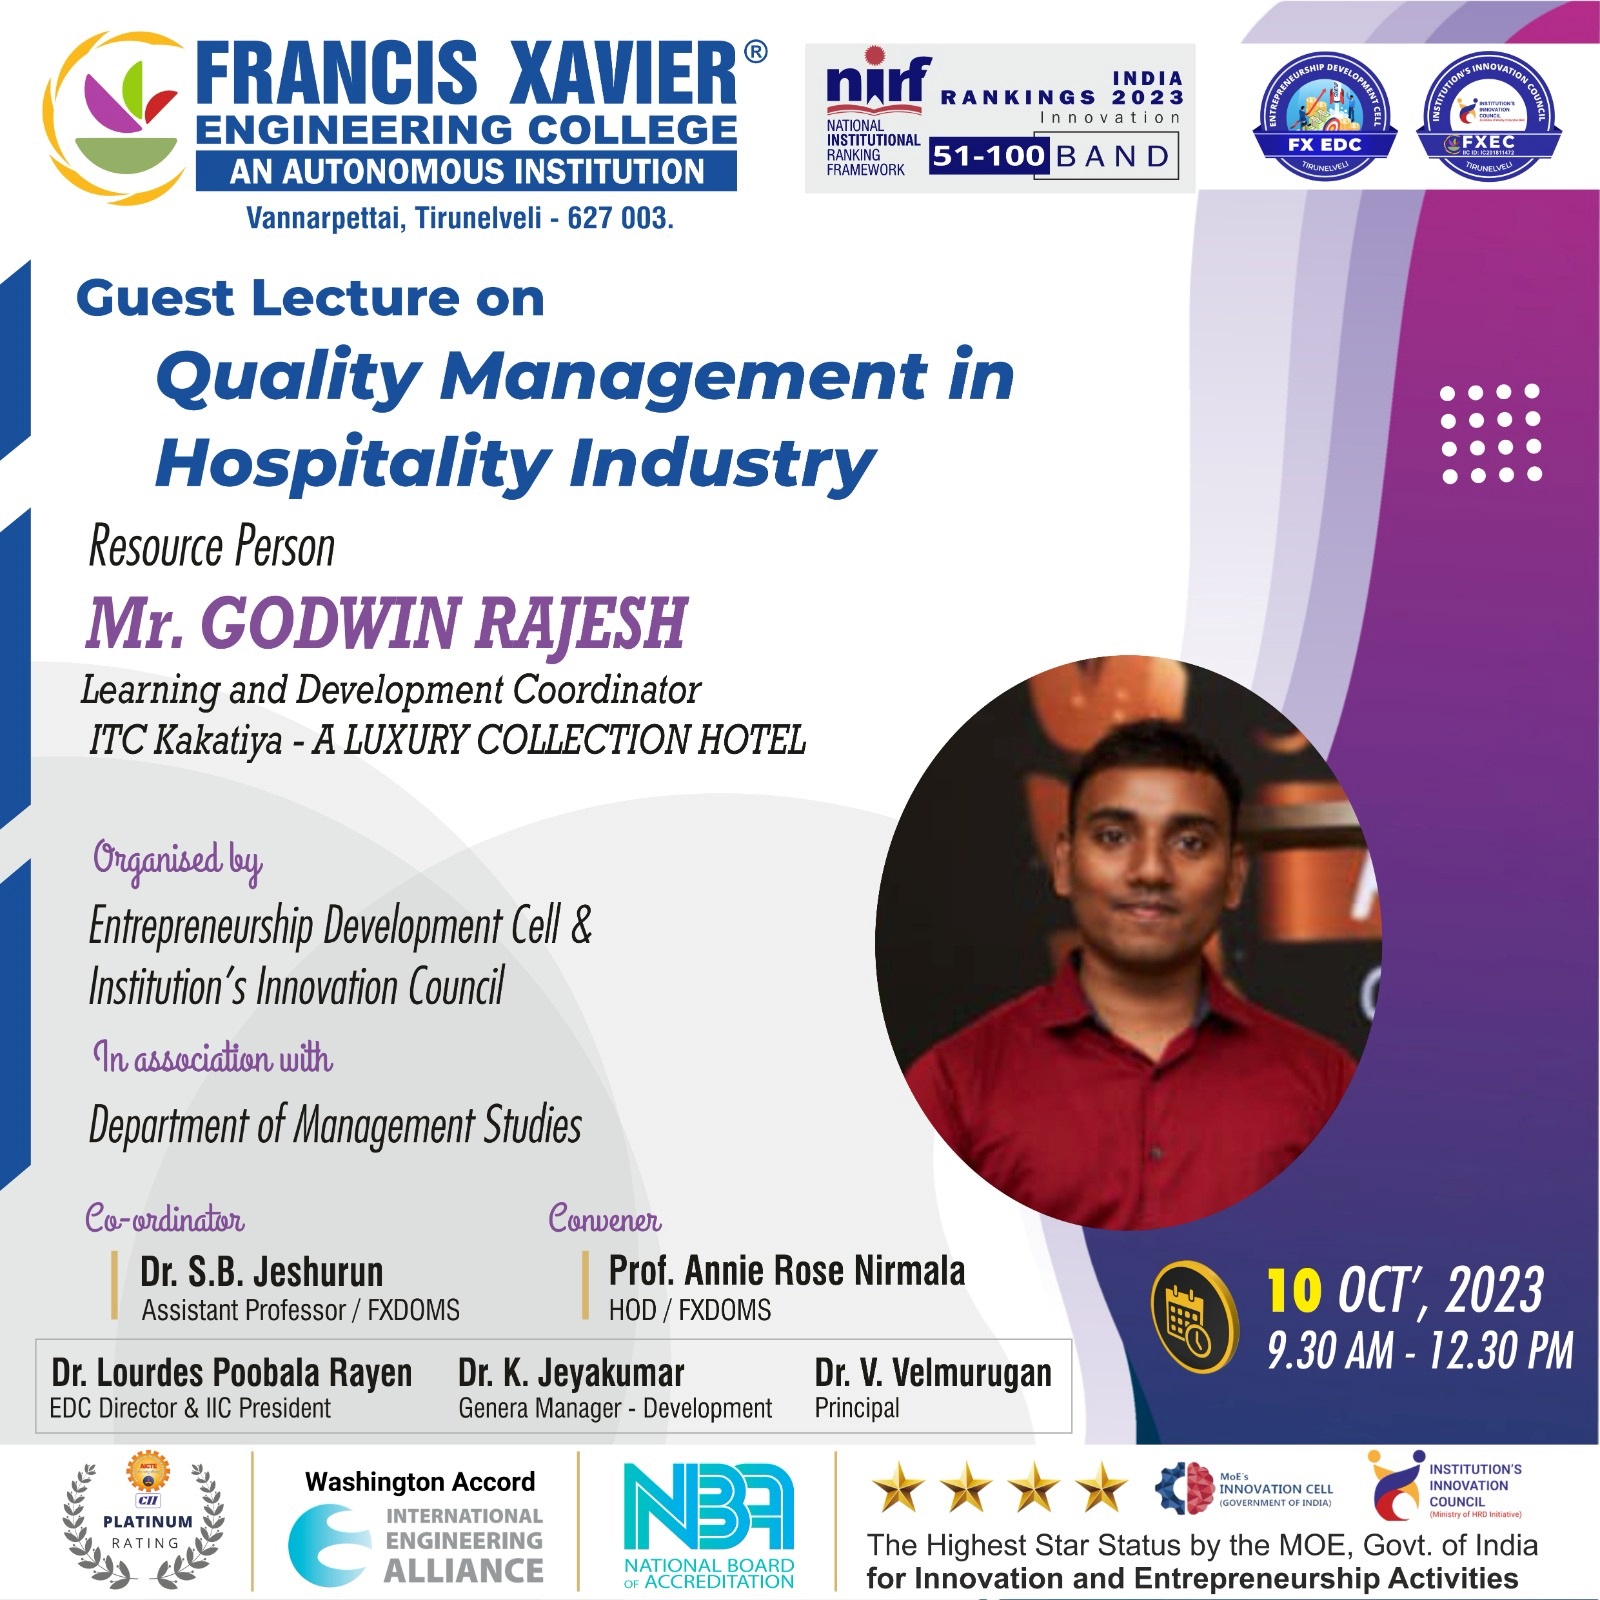 Guest Lecture on Quality Management in Hospitality Industry